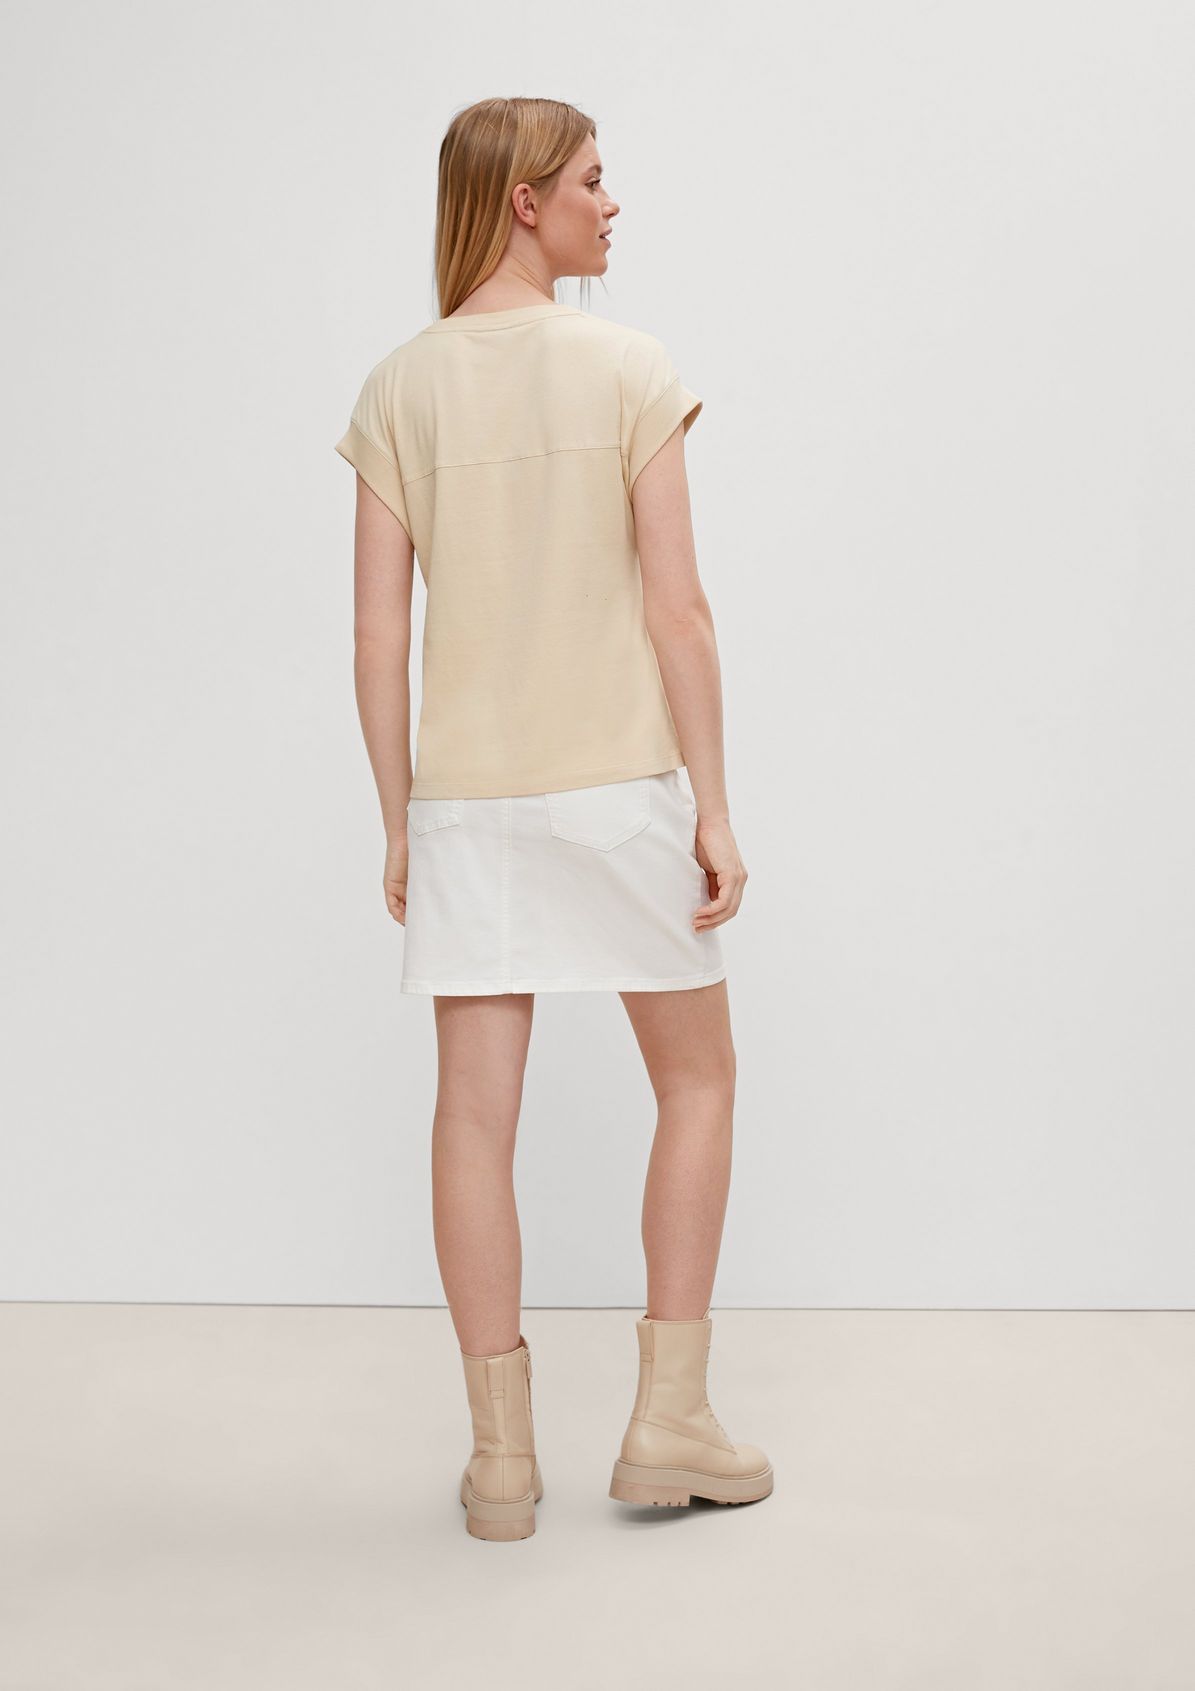 Embroidered top from comma